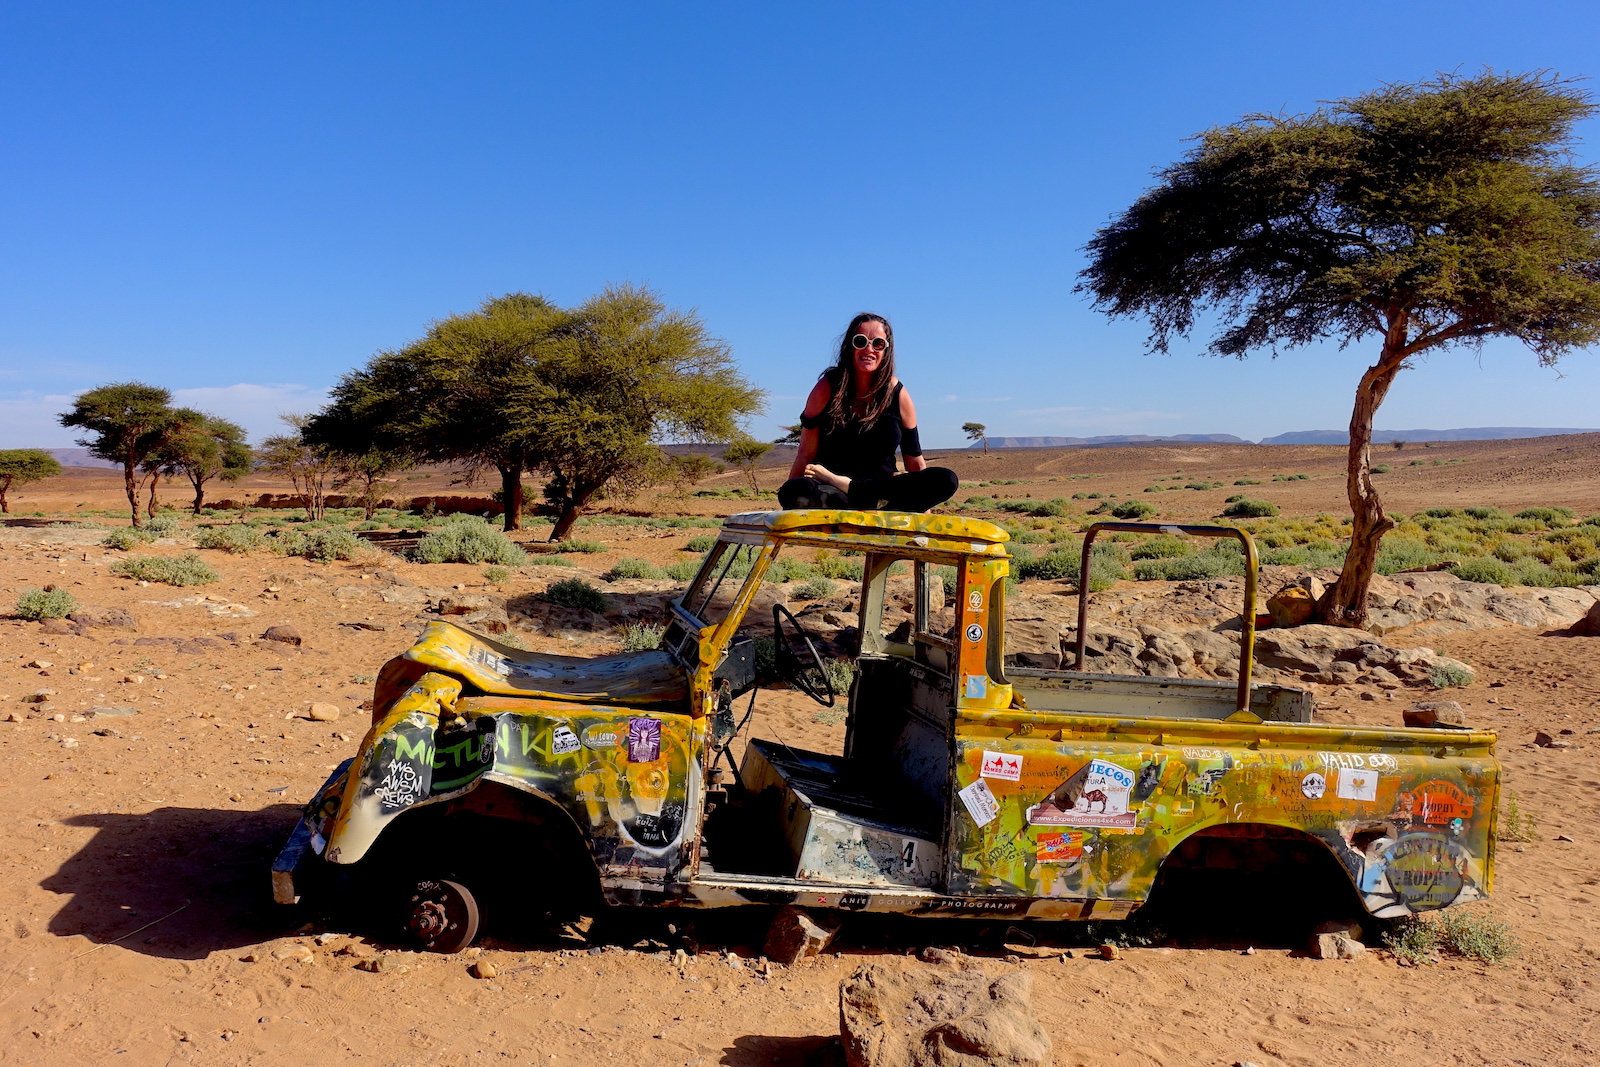 And old yellow car on the oasis that is on the way to the best desert spot in Morocco